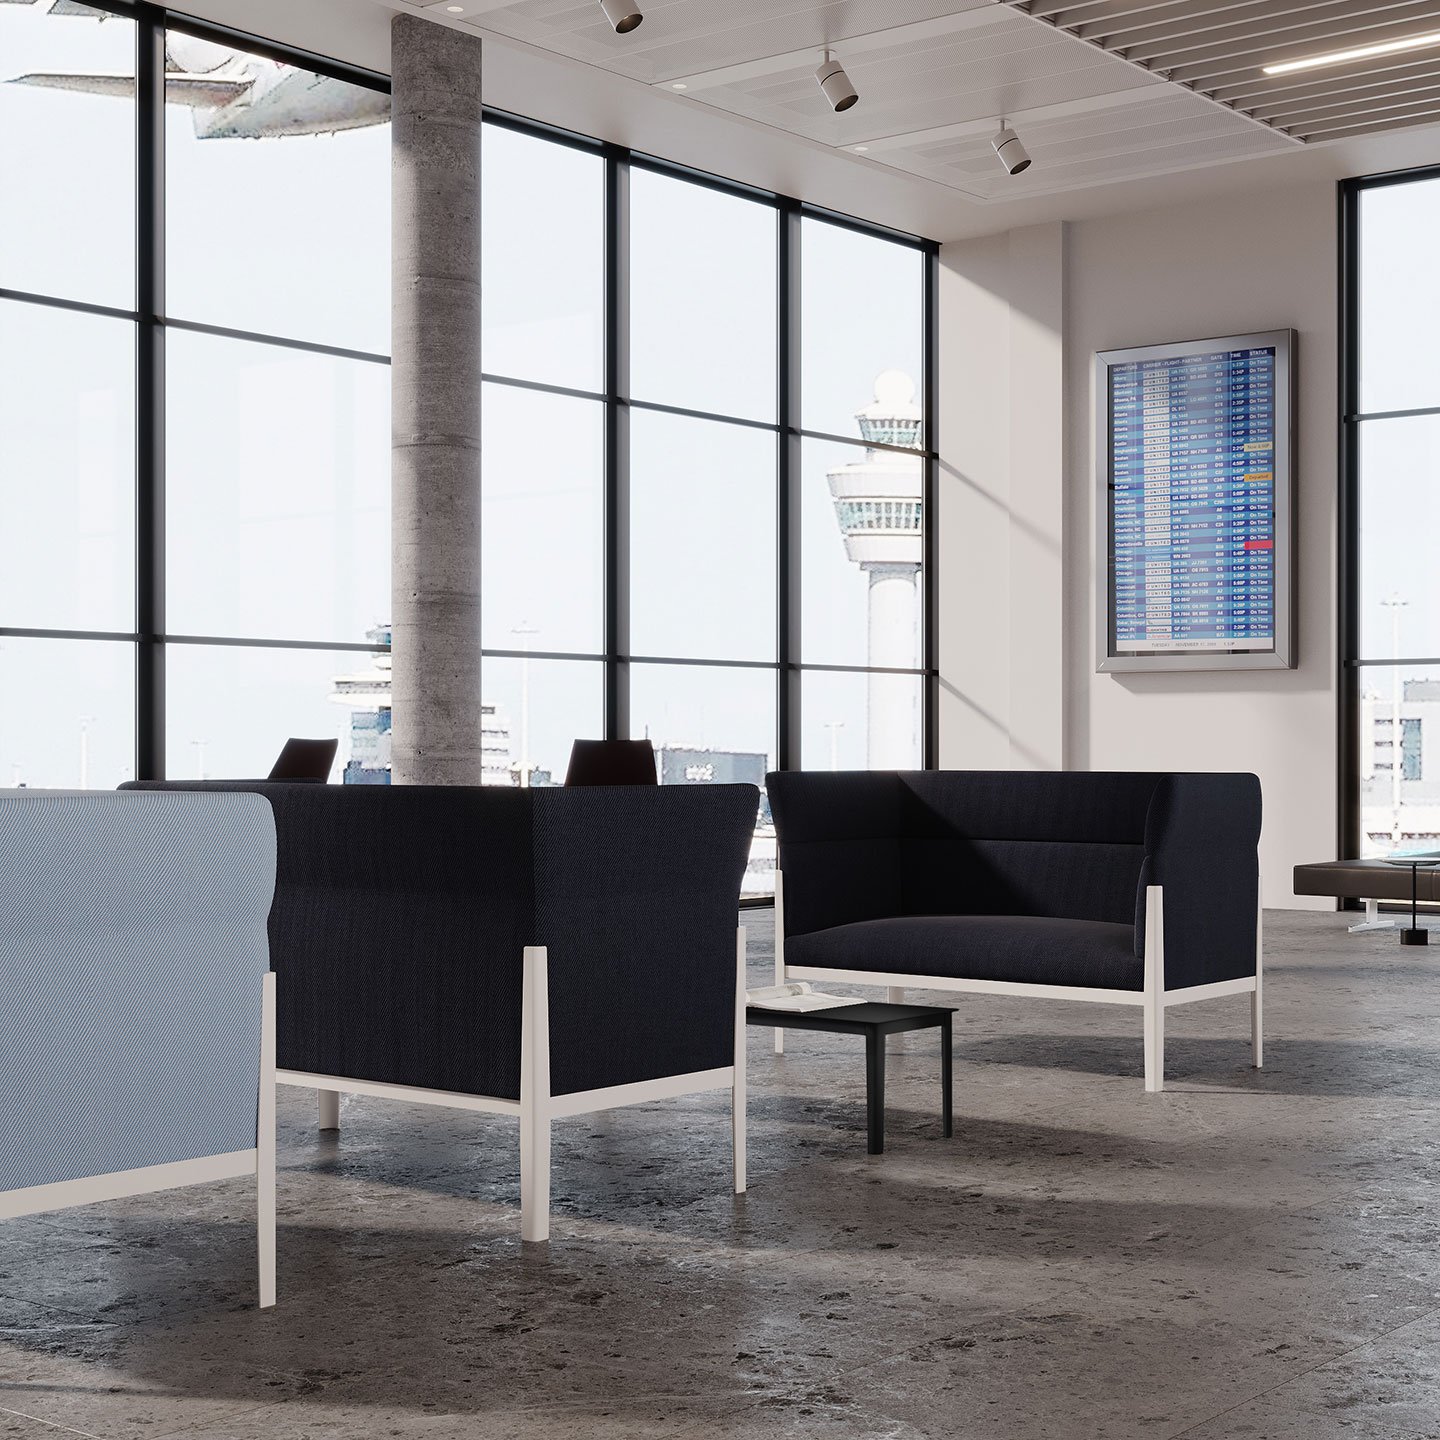 Haworth Cotone Slim lounges in black and light blue suede by the window in a open floor space of an office